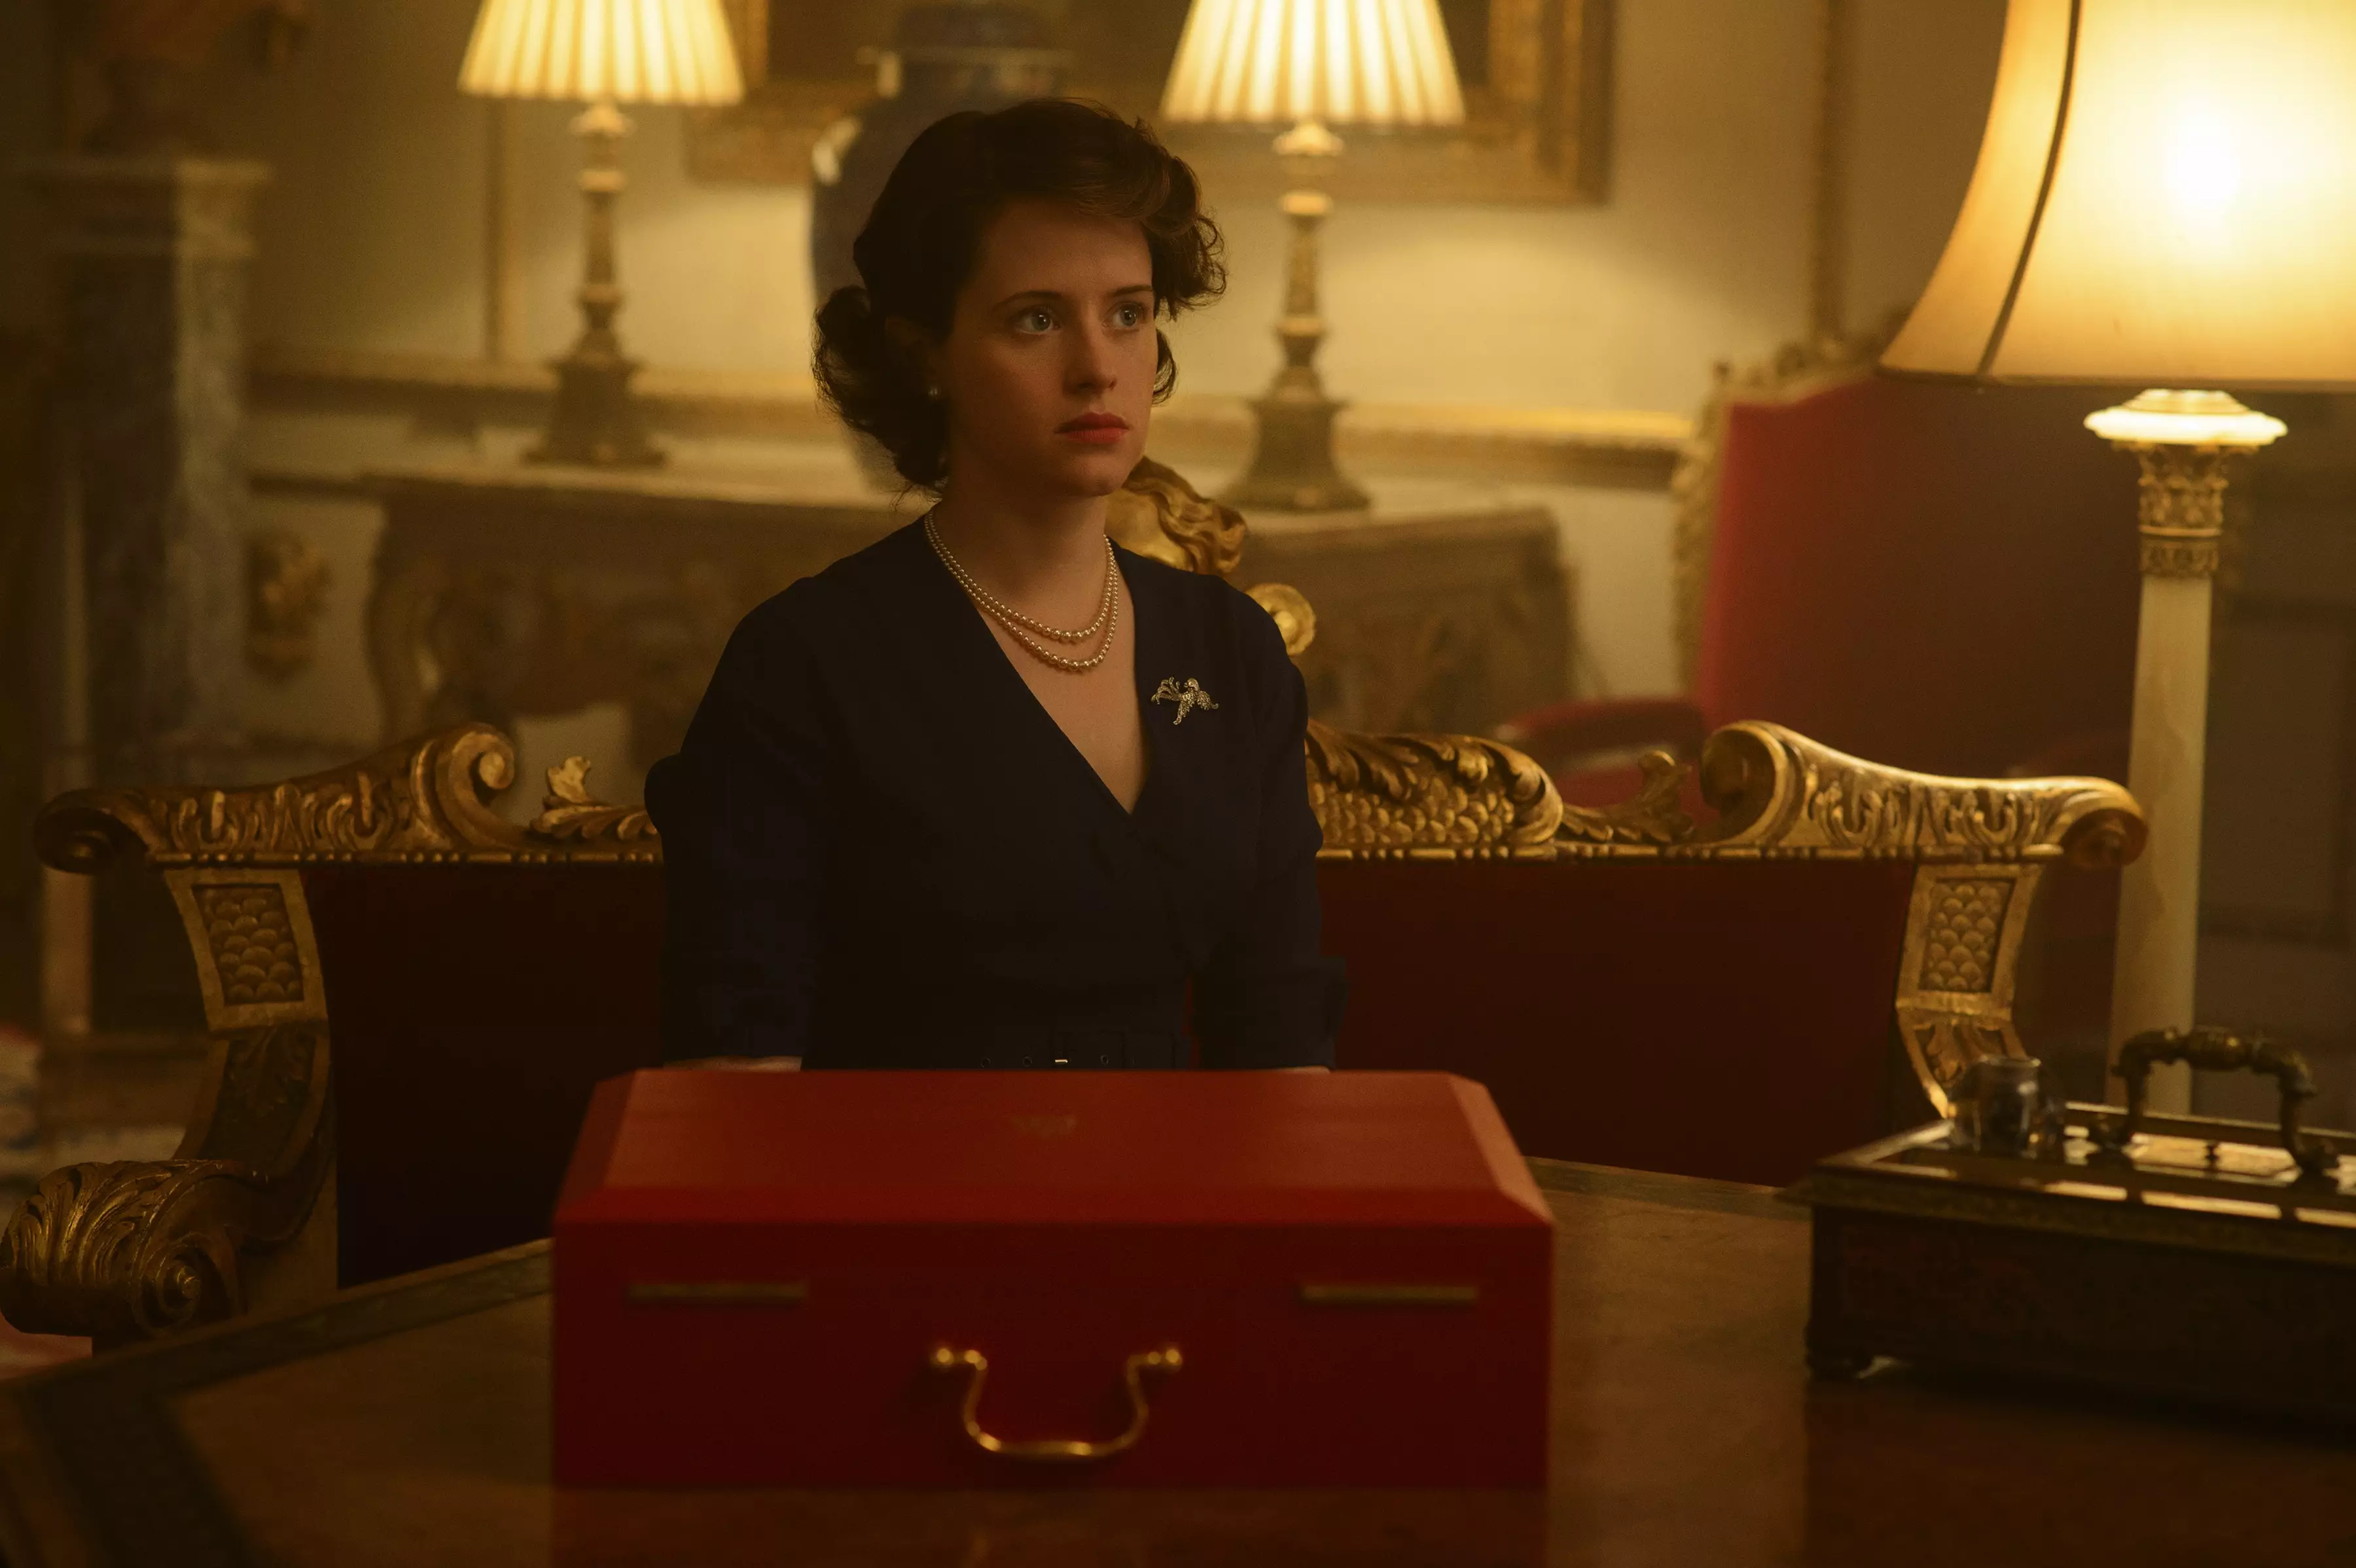 The iconic red briefcase has appeared regularly throughout 'The Crown' (